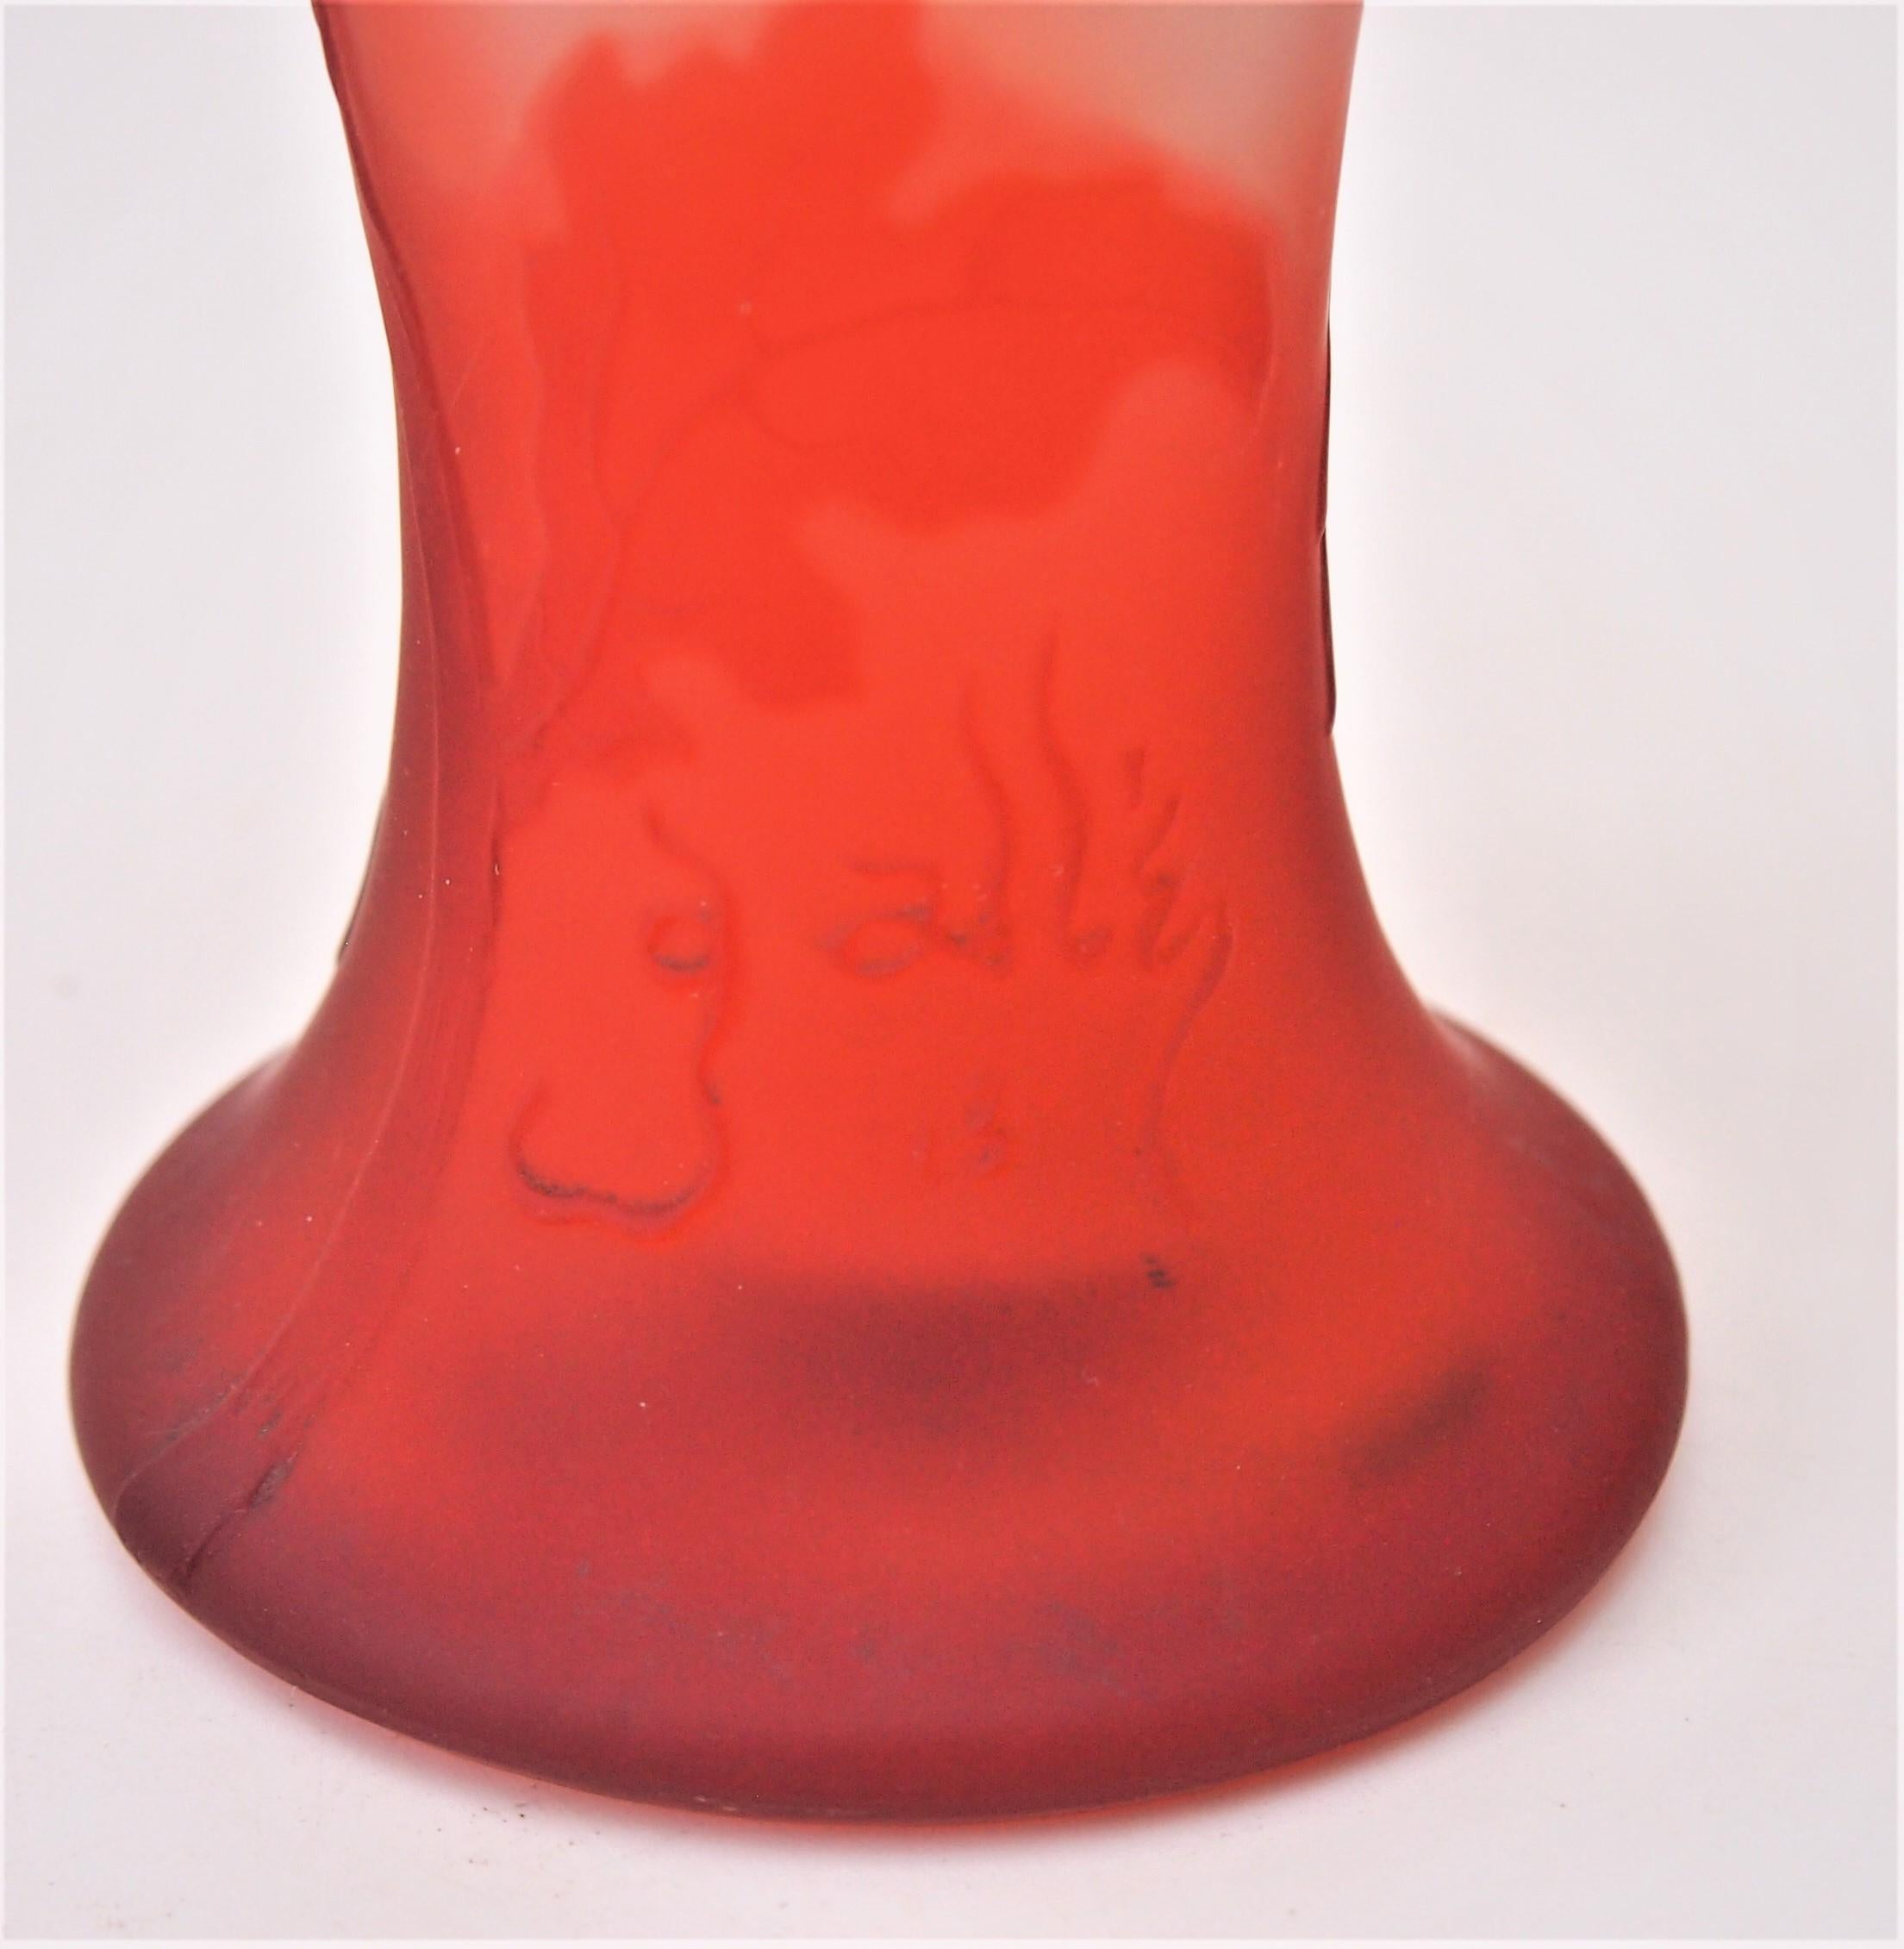 Art Glass French Art Nouveau Emile Galle Cameo Glass Limited Edition Vase, circa 1900 For Sale